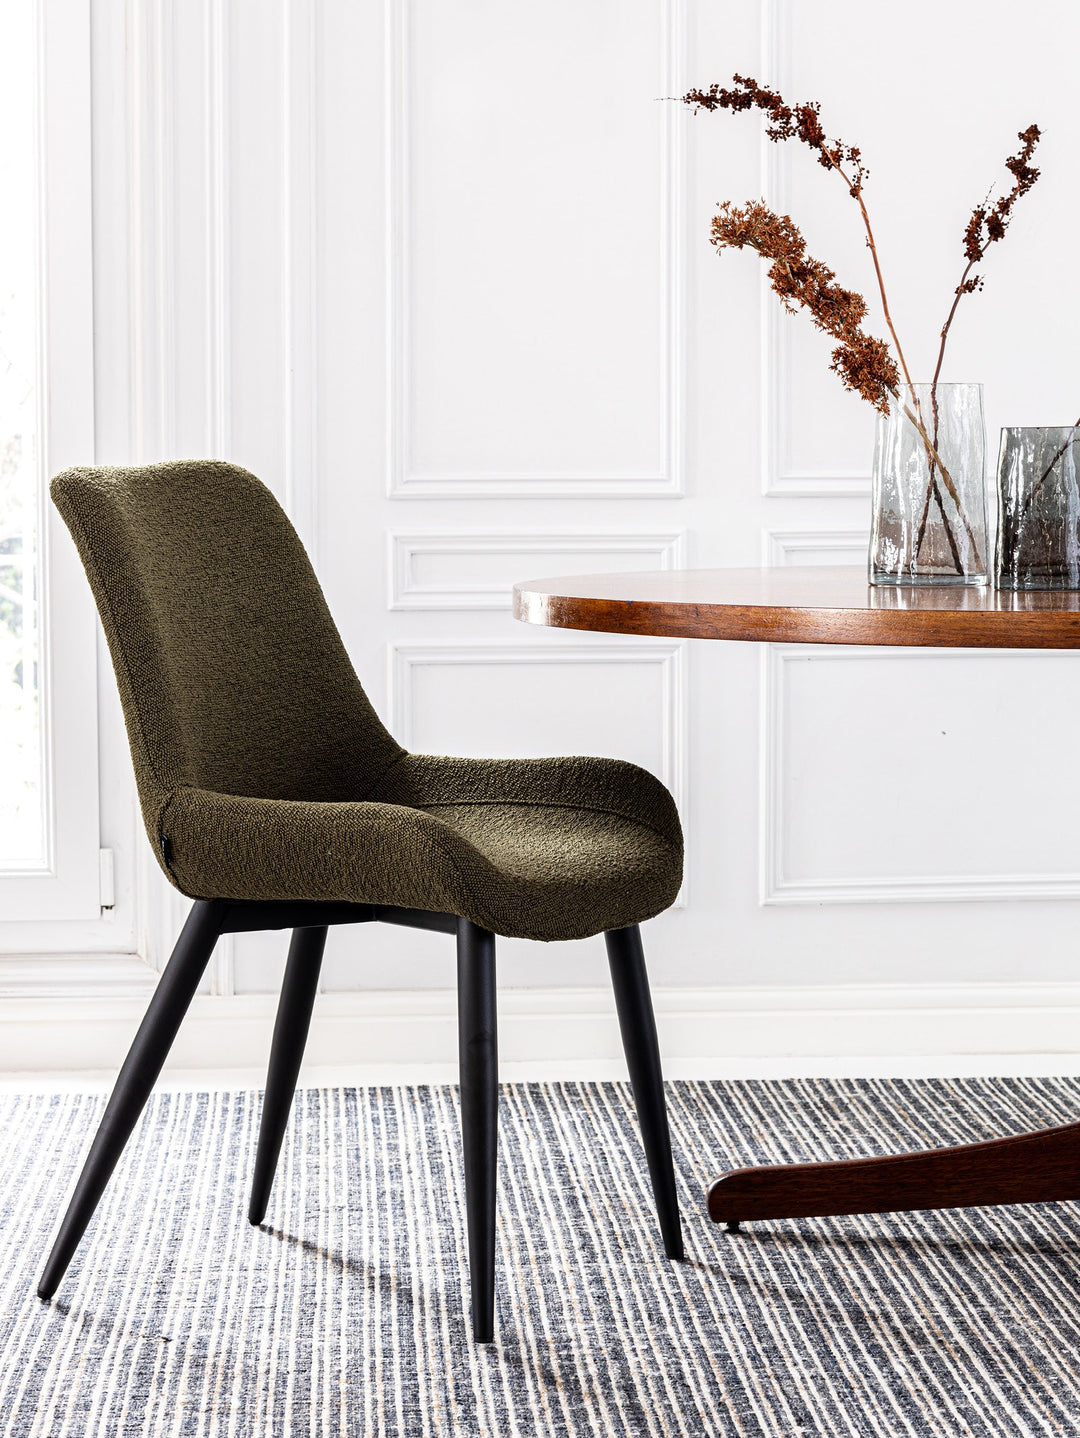 Gladstone Cologne Dining Chair in Cypress - Kitchen & Dining Room Chairs- Hertex Haus Online - Furniture